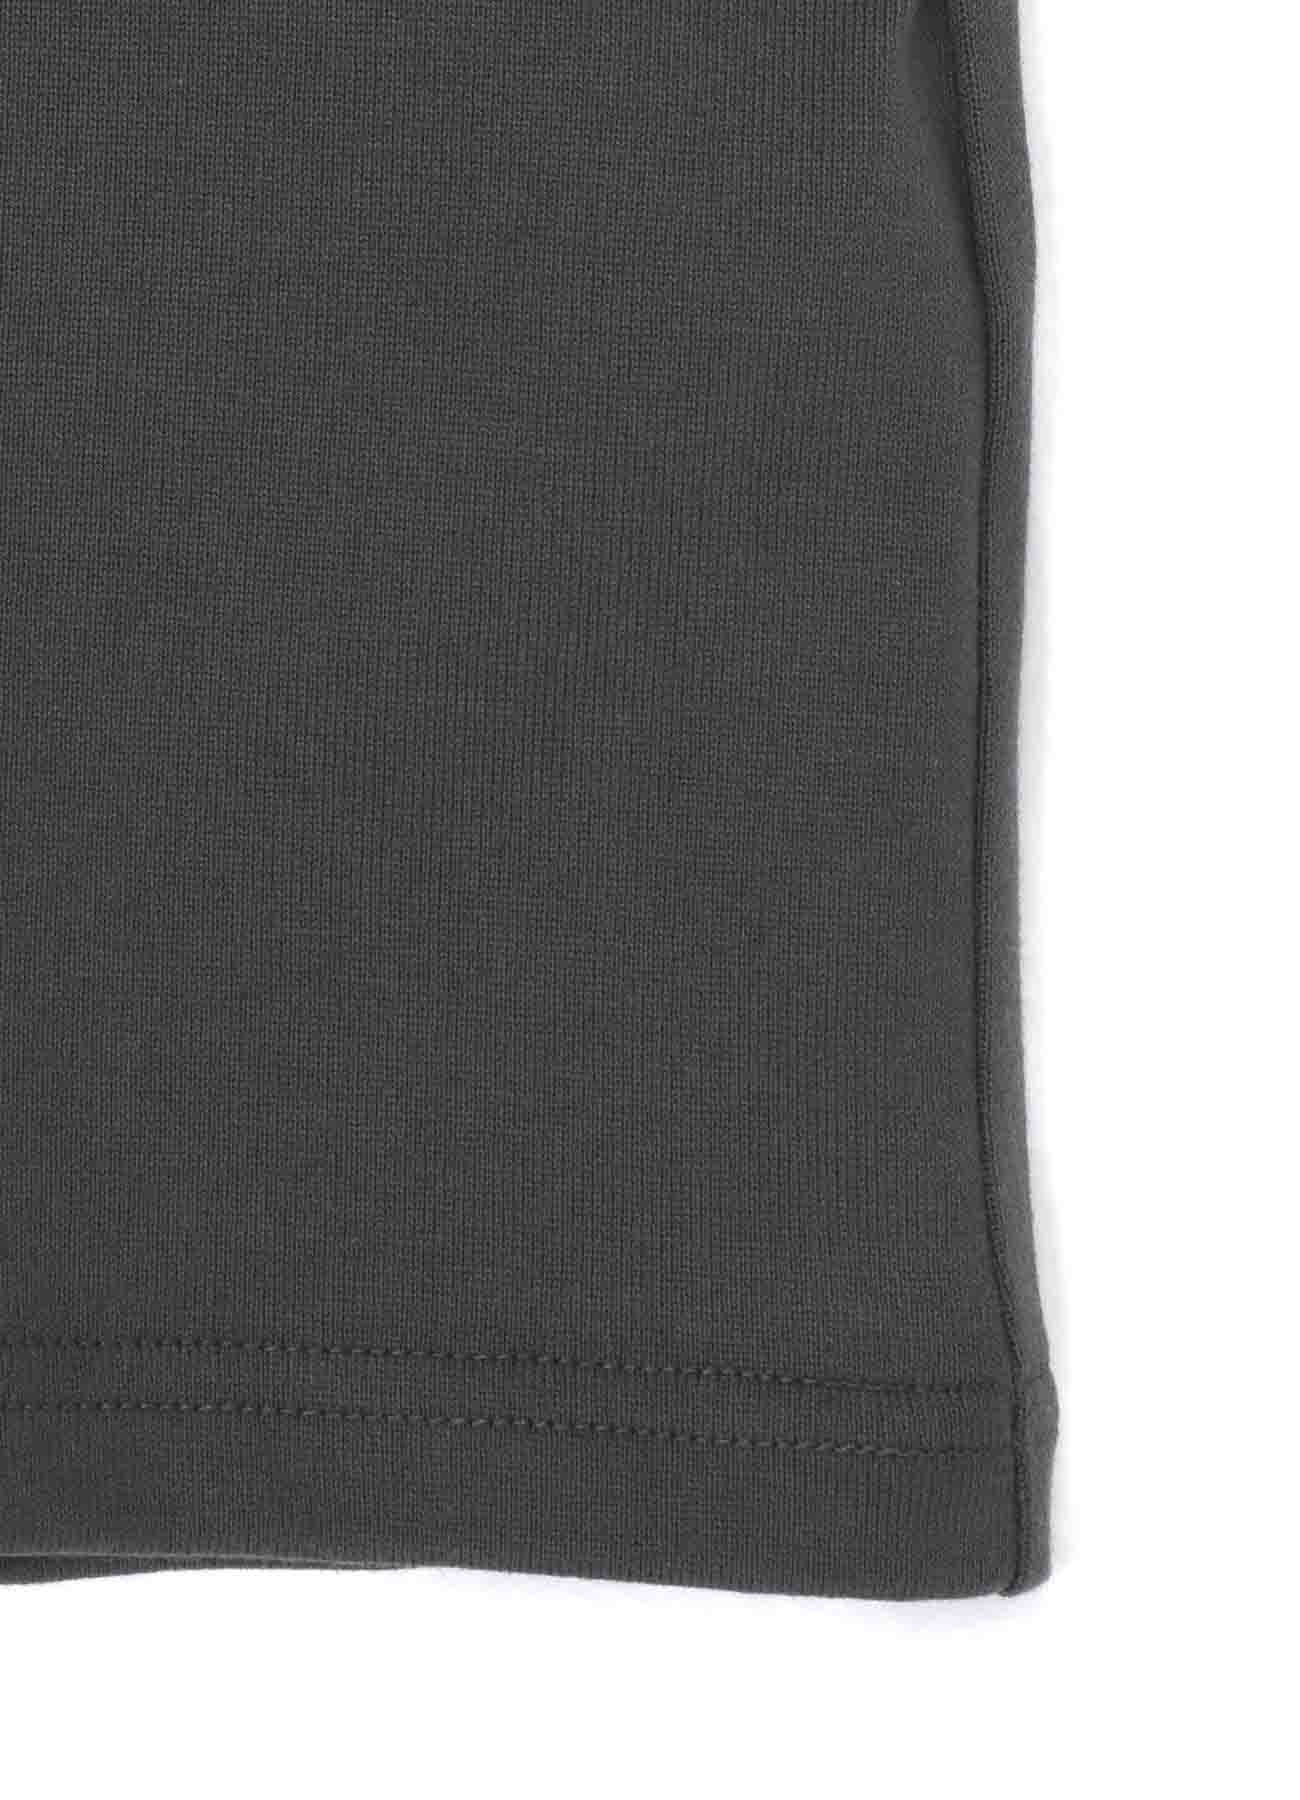 30/2 TIGHT TENSION SINGLE JERSEY RE SHOULDER PANEL LONG SLEEVE T